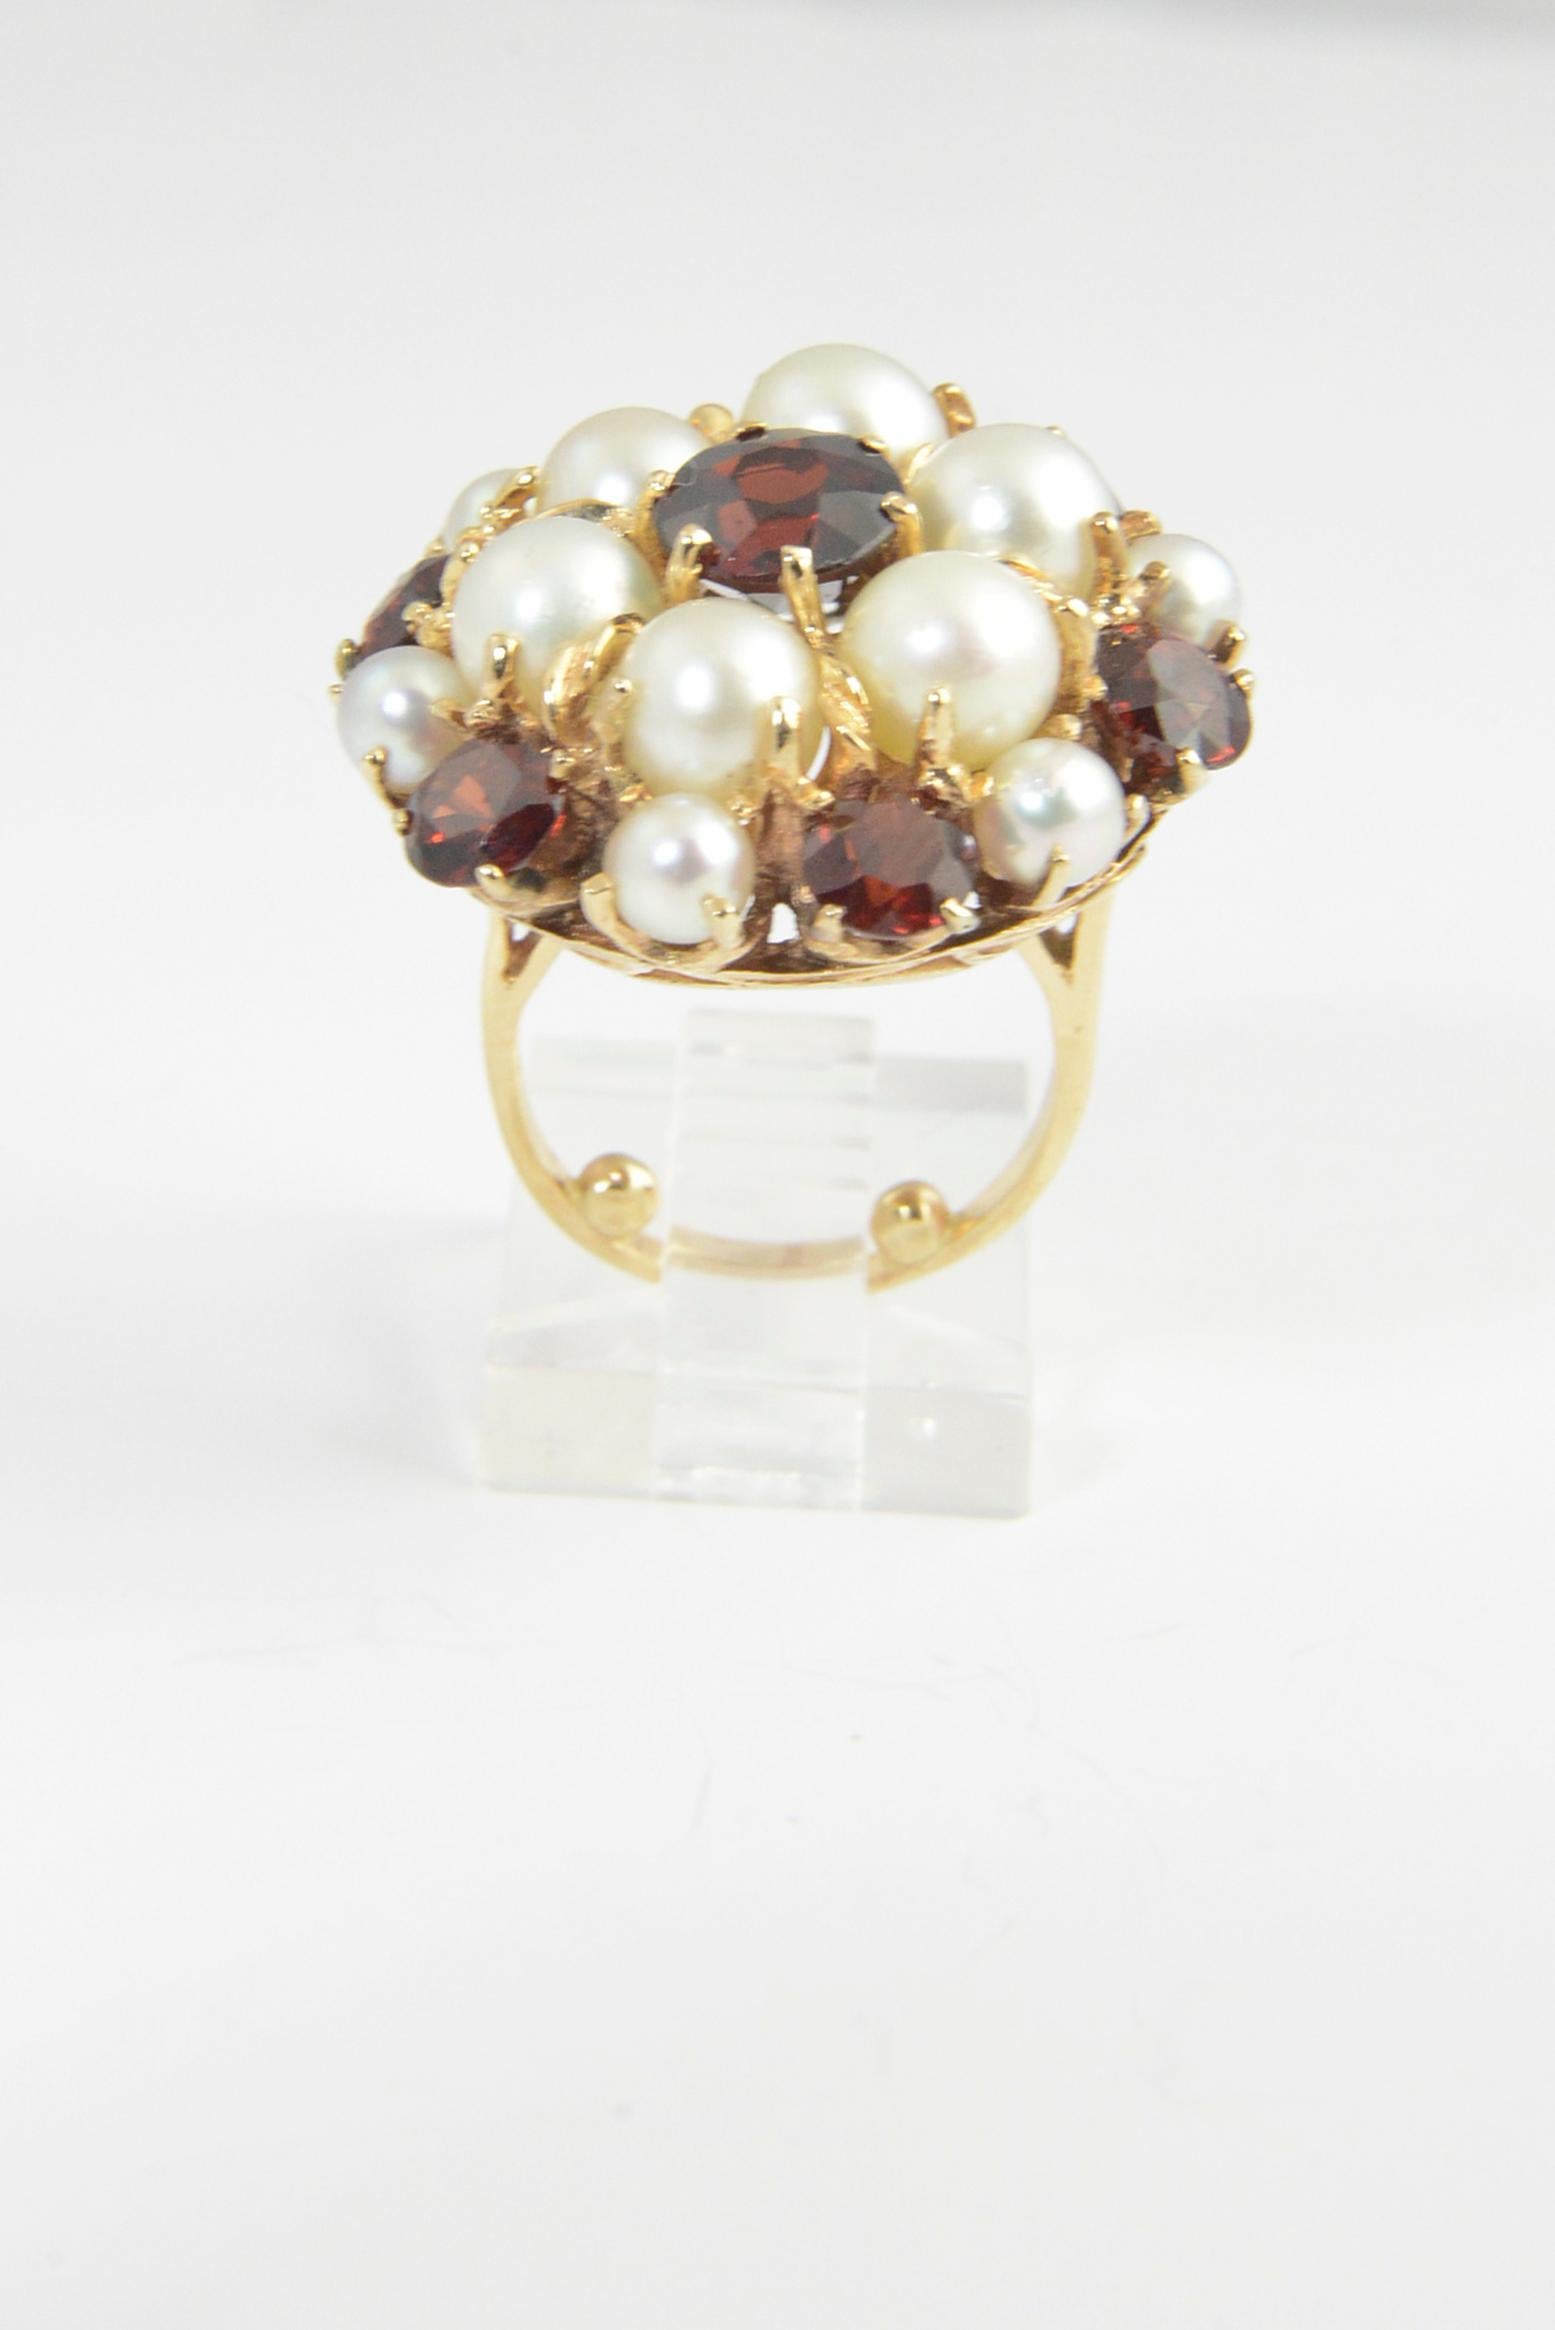 1950s Dome cocktail ring featuring a cluster of garnets and cultured pearls set in 14K yellow gold mount.
 US size 3.5 - it can easily be size up either by removing the beads or adding to the back. 
No maker's mark.